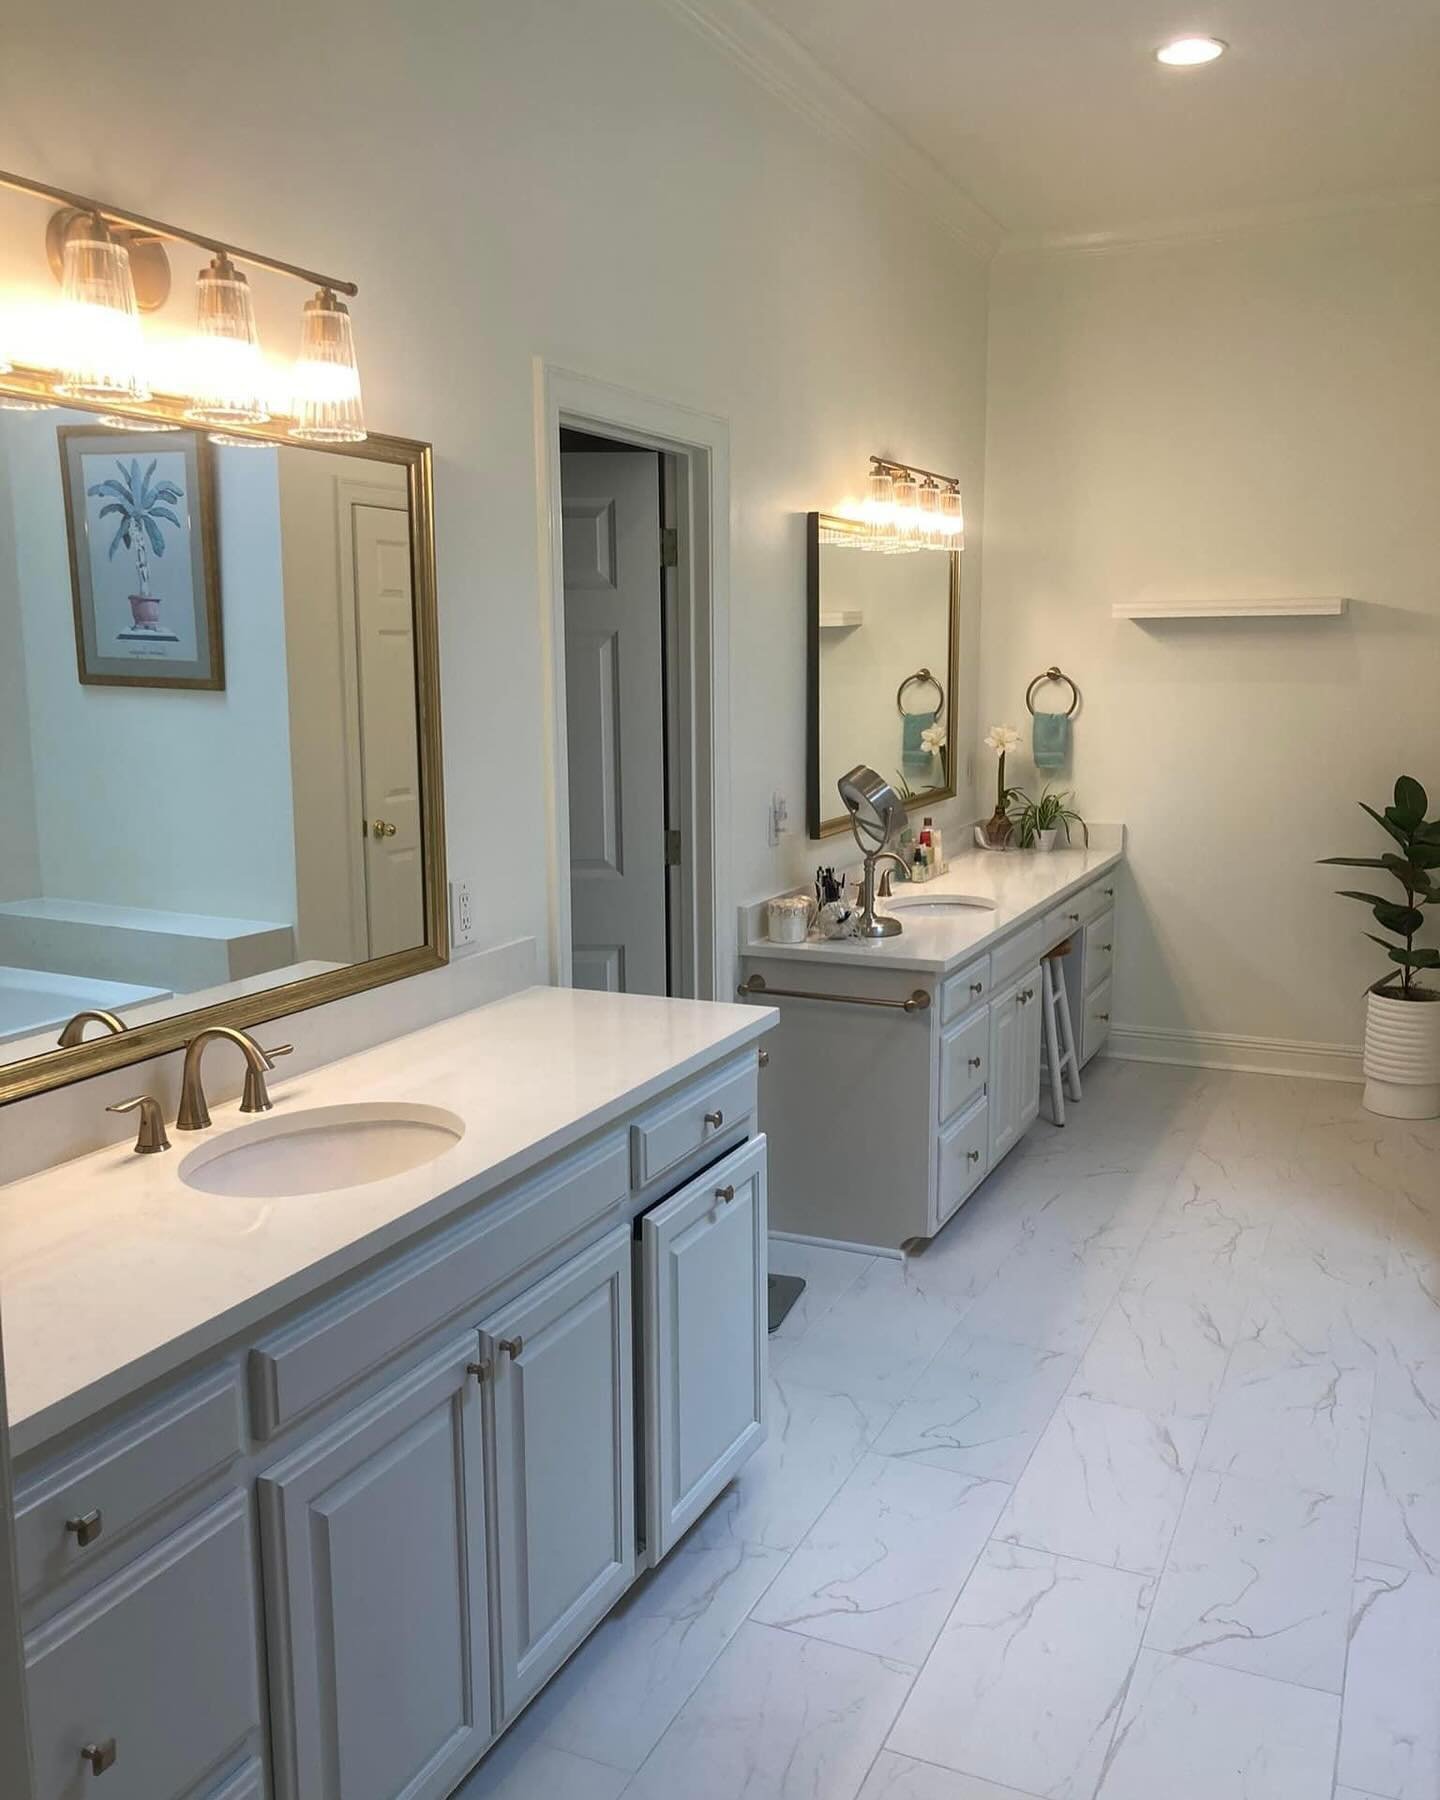 You know that type of bathroom that you just love to spend time in? We make those happen!🛀🪞

Give us a call to schedule your FREE estimate today!☎️

#bathroomremodel #loveyourspace #bayoupainting #louisiana #batonrouge #painter #contractor #service